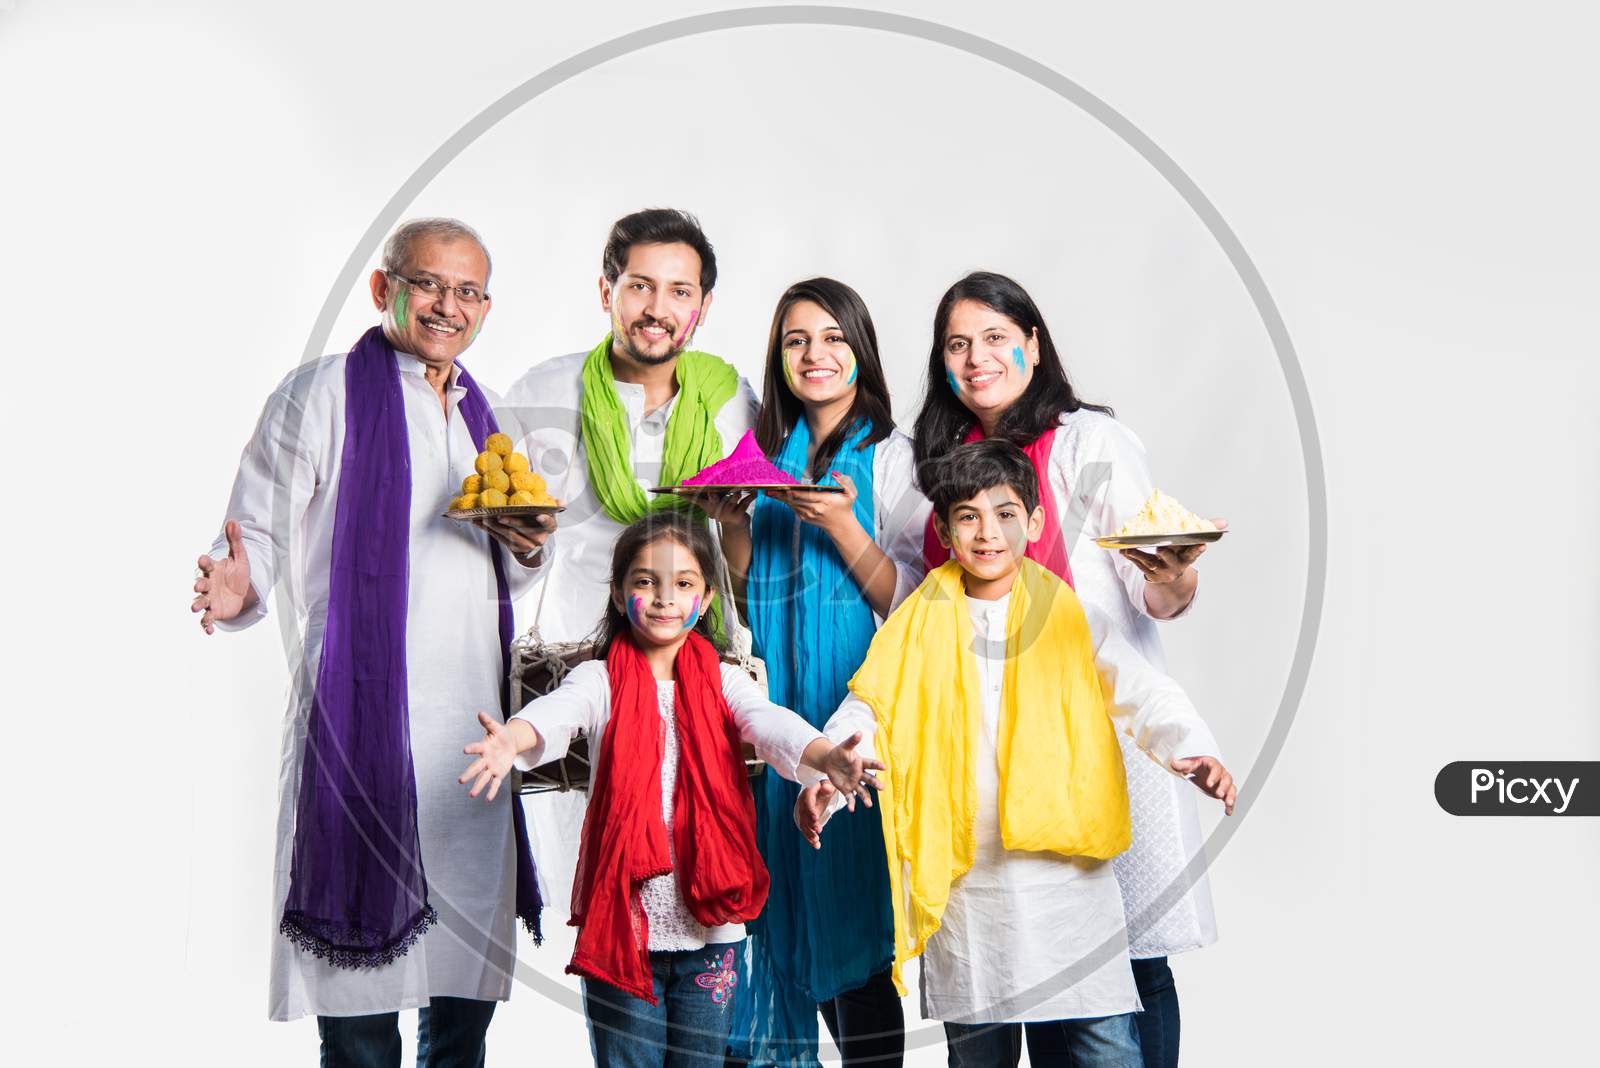 Indian Family playing holi posing for group photo over white background